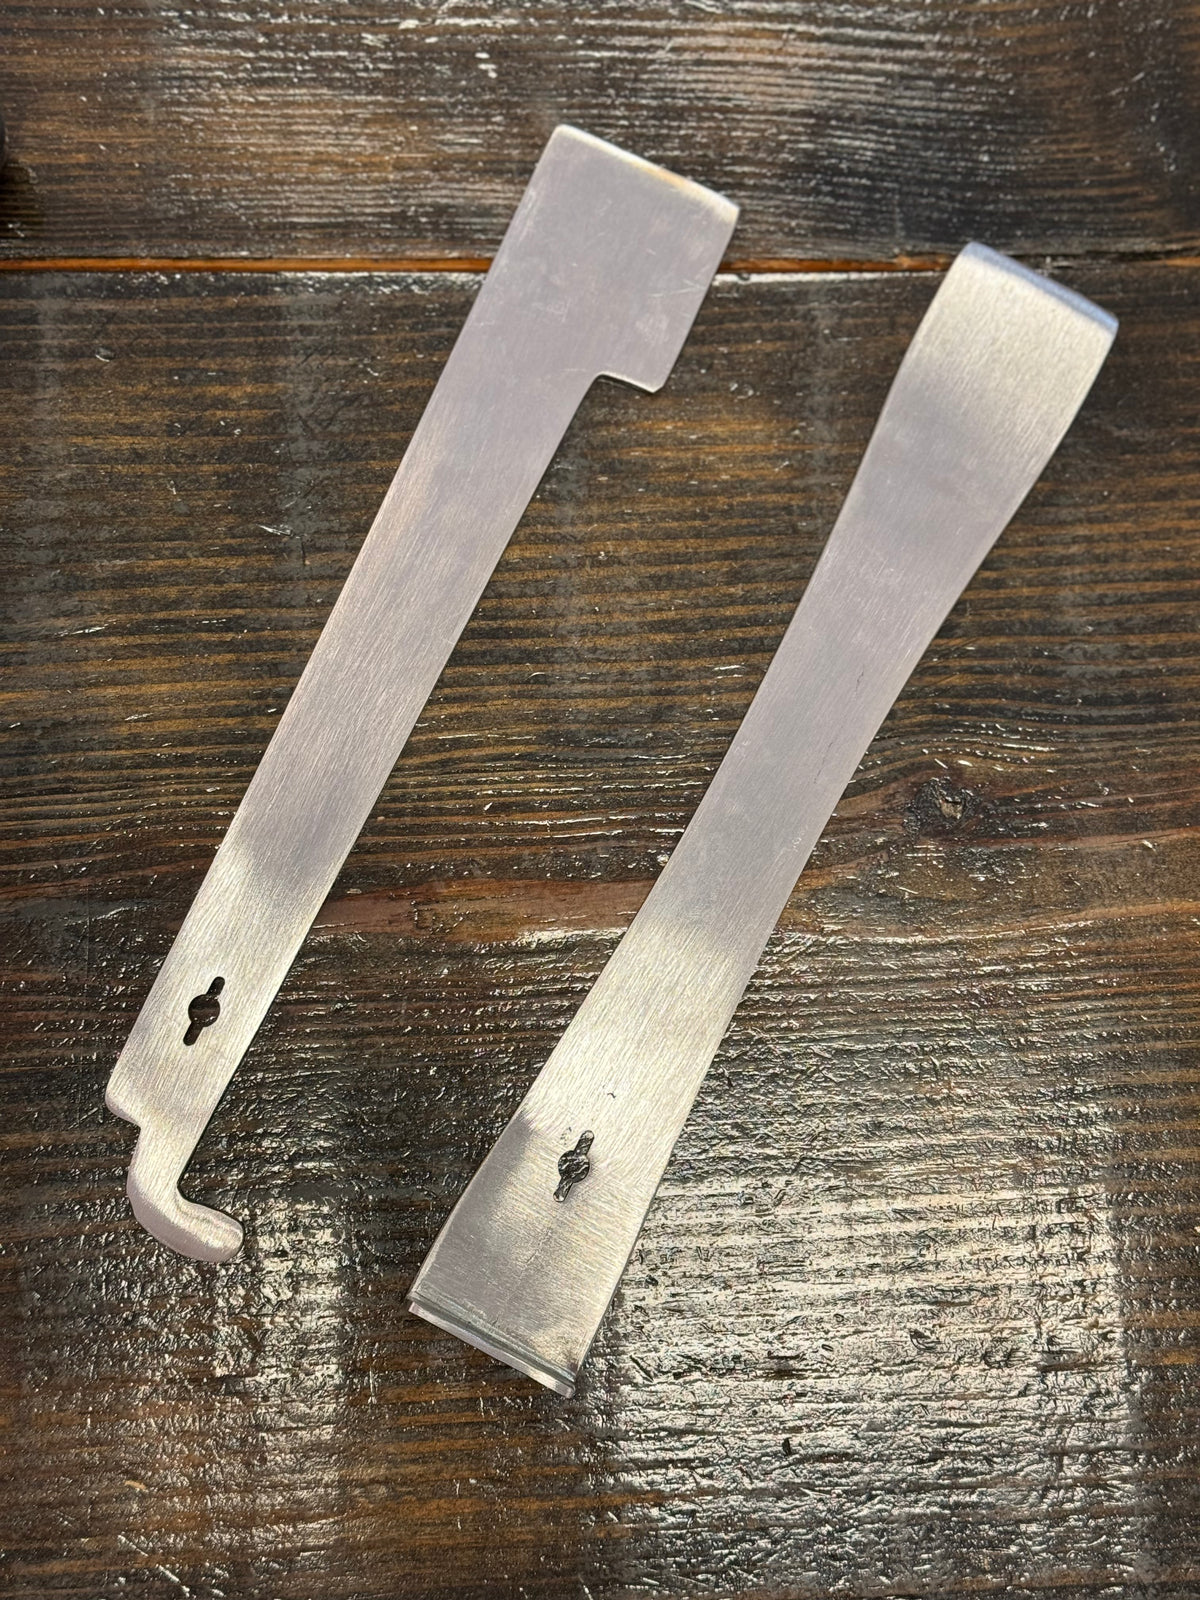 Stainless Steel Pro Lifter and Scraper Hive Tool